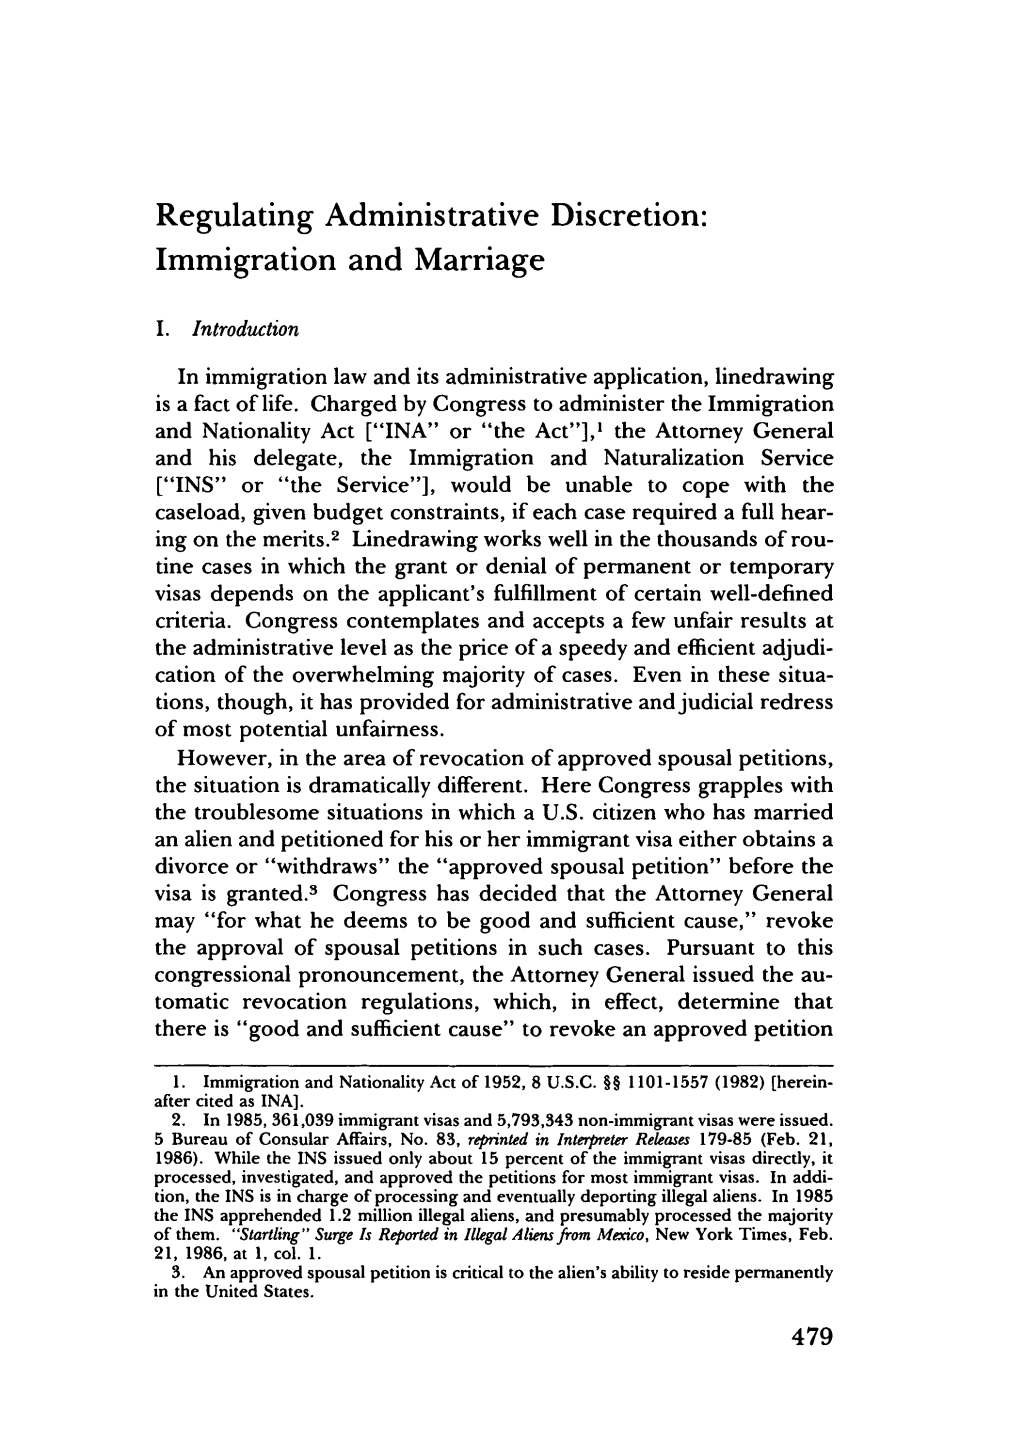 Regulating Administrative Discretion: Immigration and Marriage